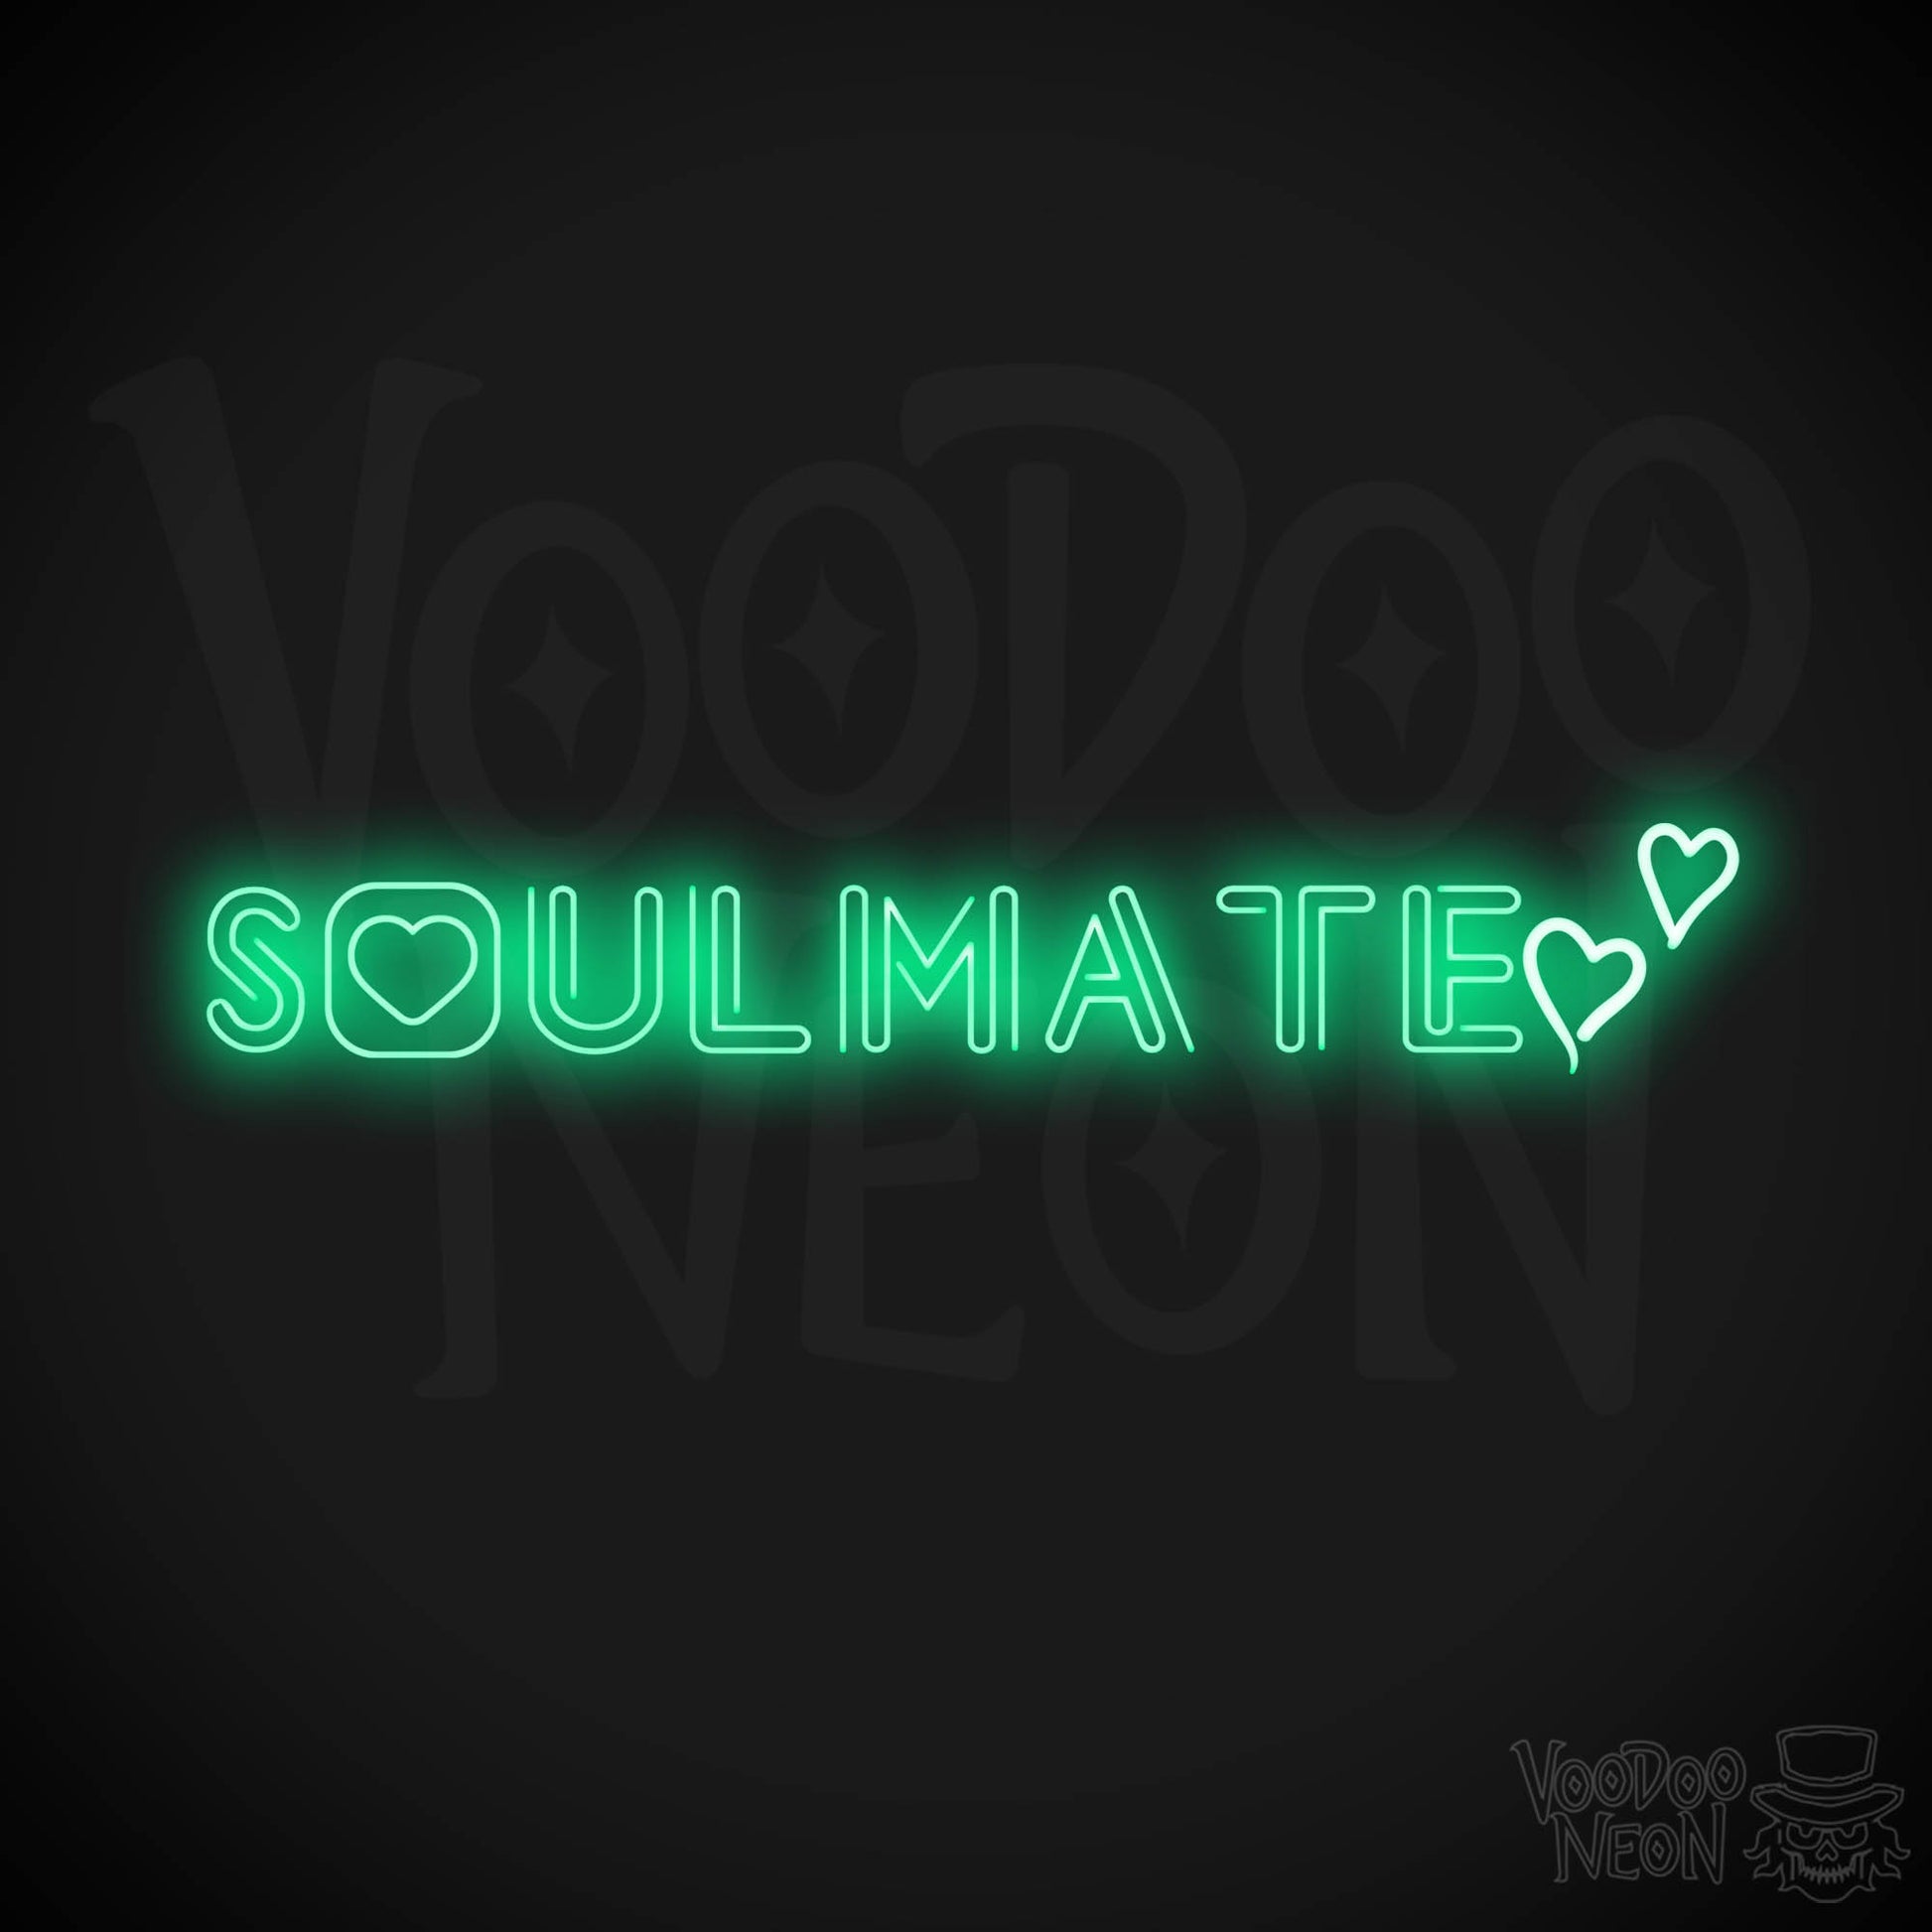 Soulmate Neon Sign - Neon Soulmate Sign - LED Neon Wall Art - Color Green